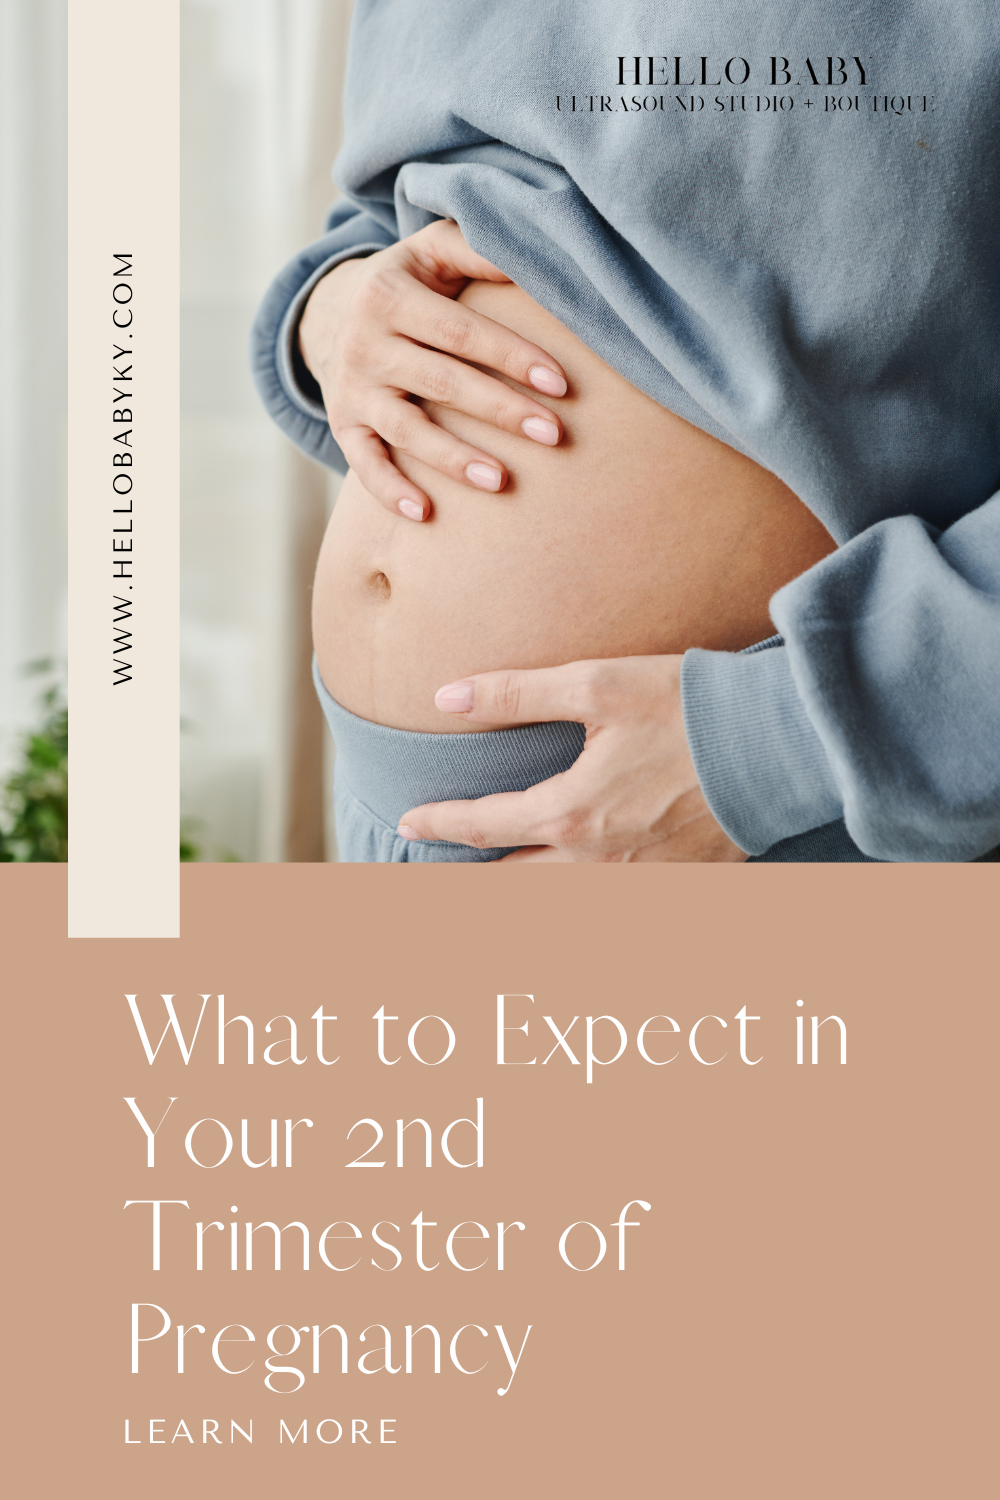 What to Expect in Your Second Trimester of Pregnancy - Hello Baby Blog